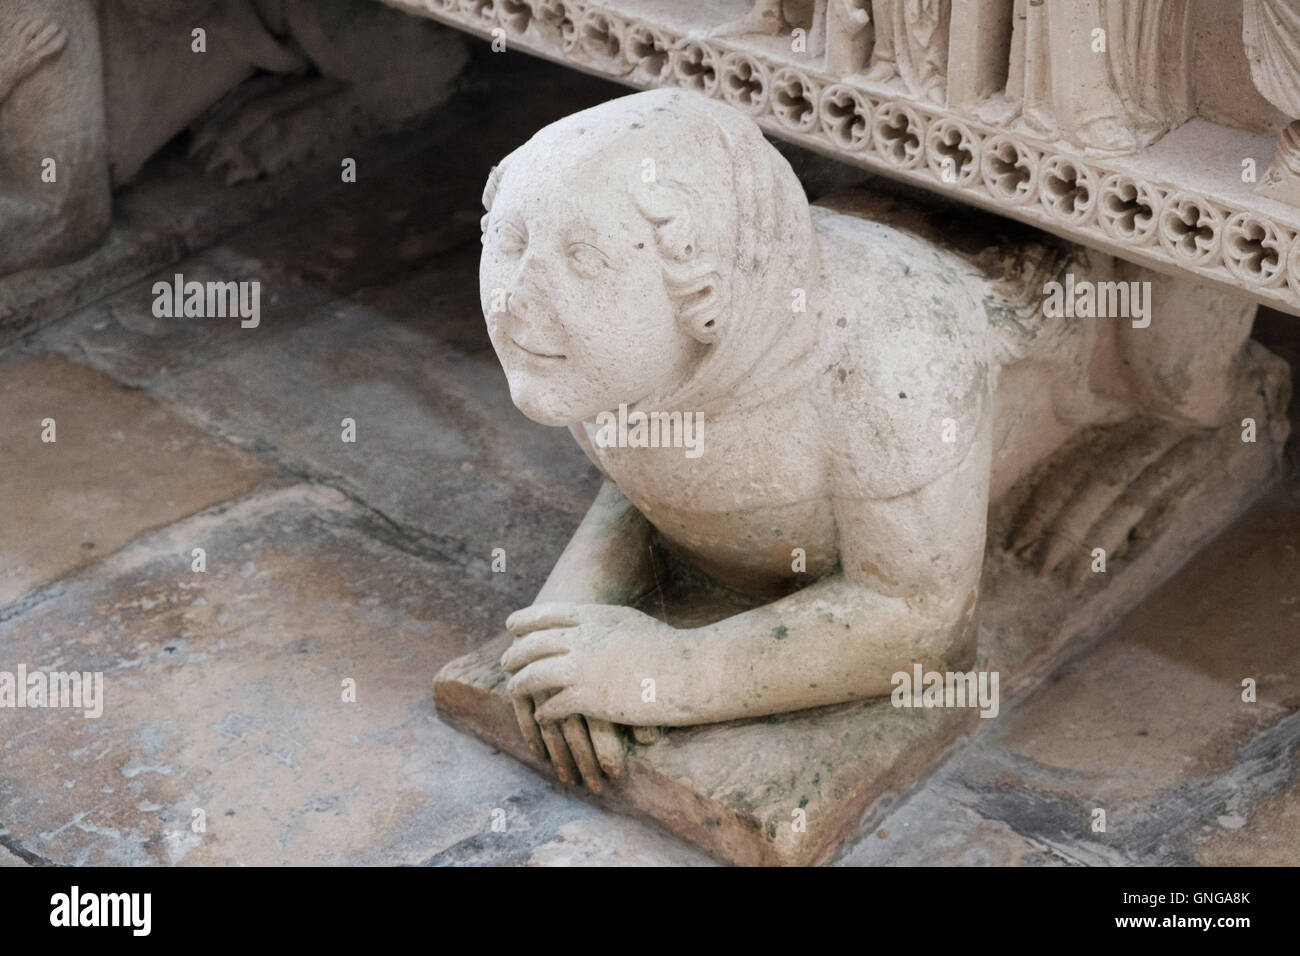 One of six mythic creatures supporting the Gothic royal tomb of Inês de Castro  in the Alcobaça Monastery, Portugal. Stock Photo